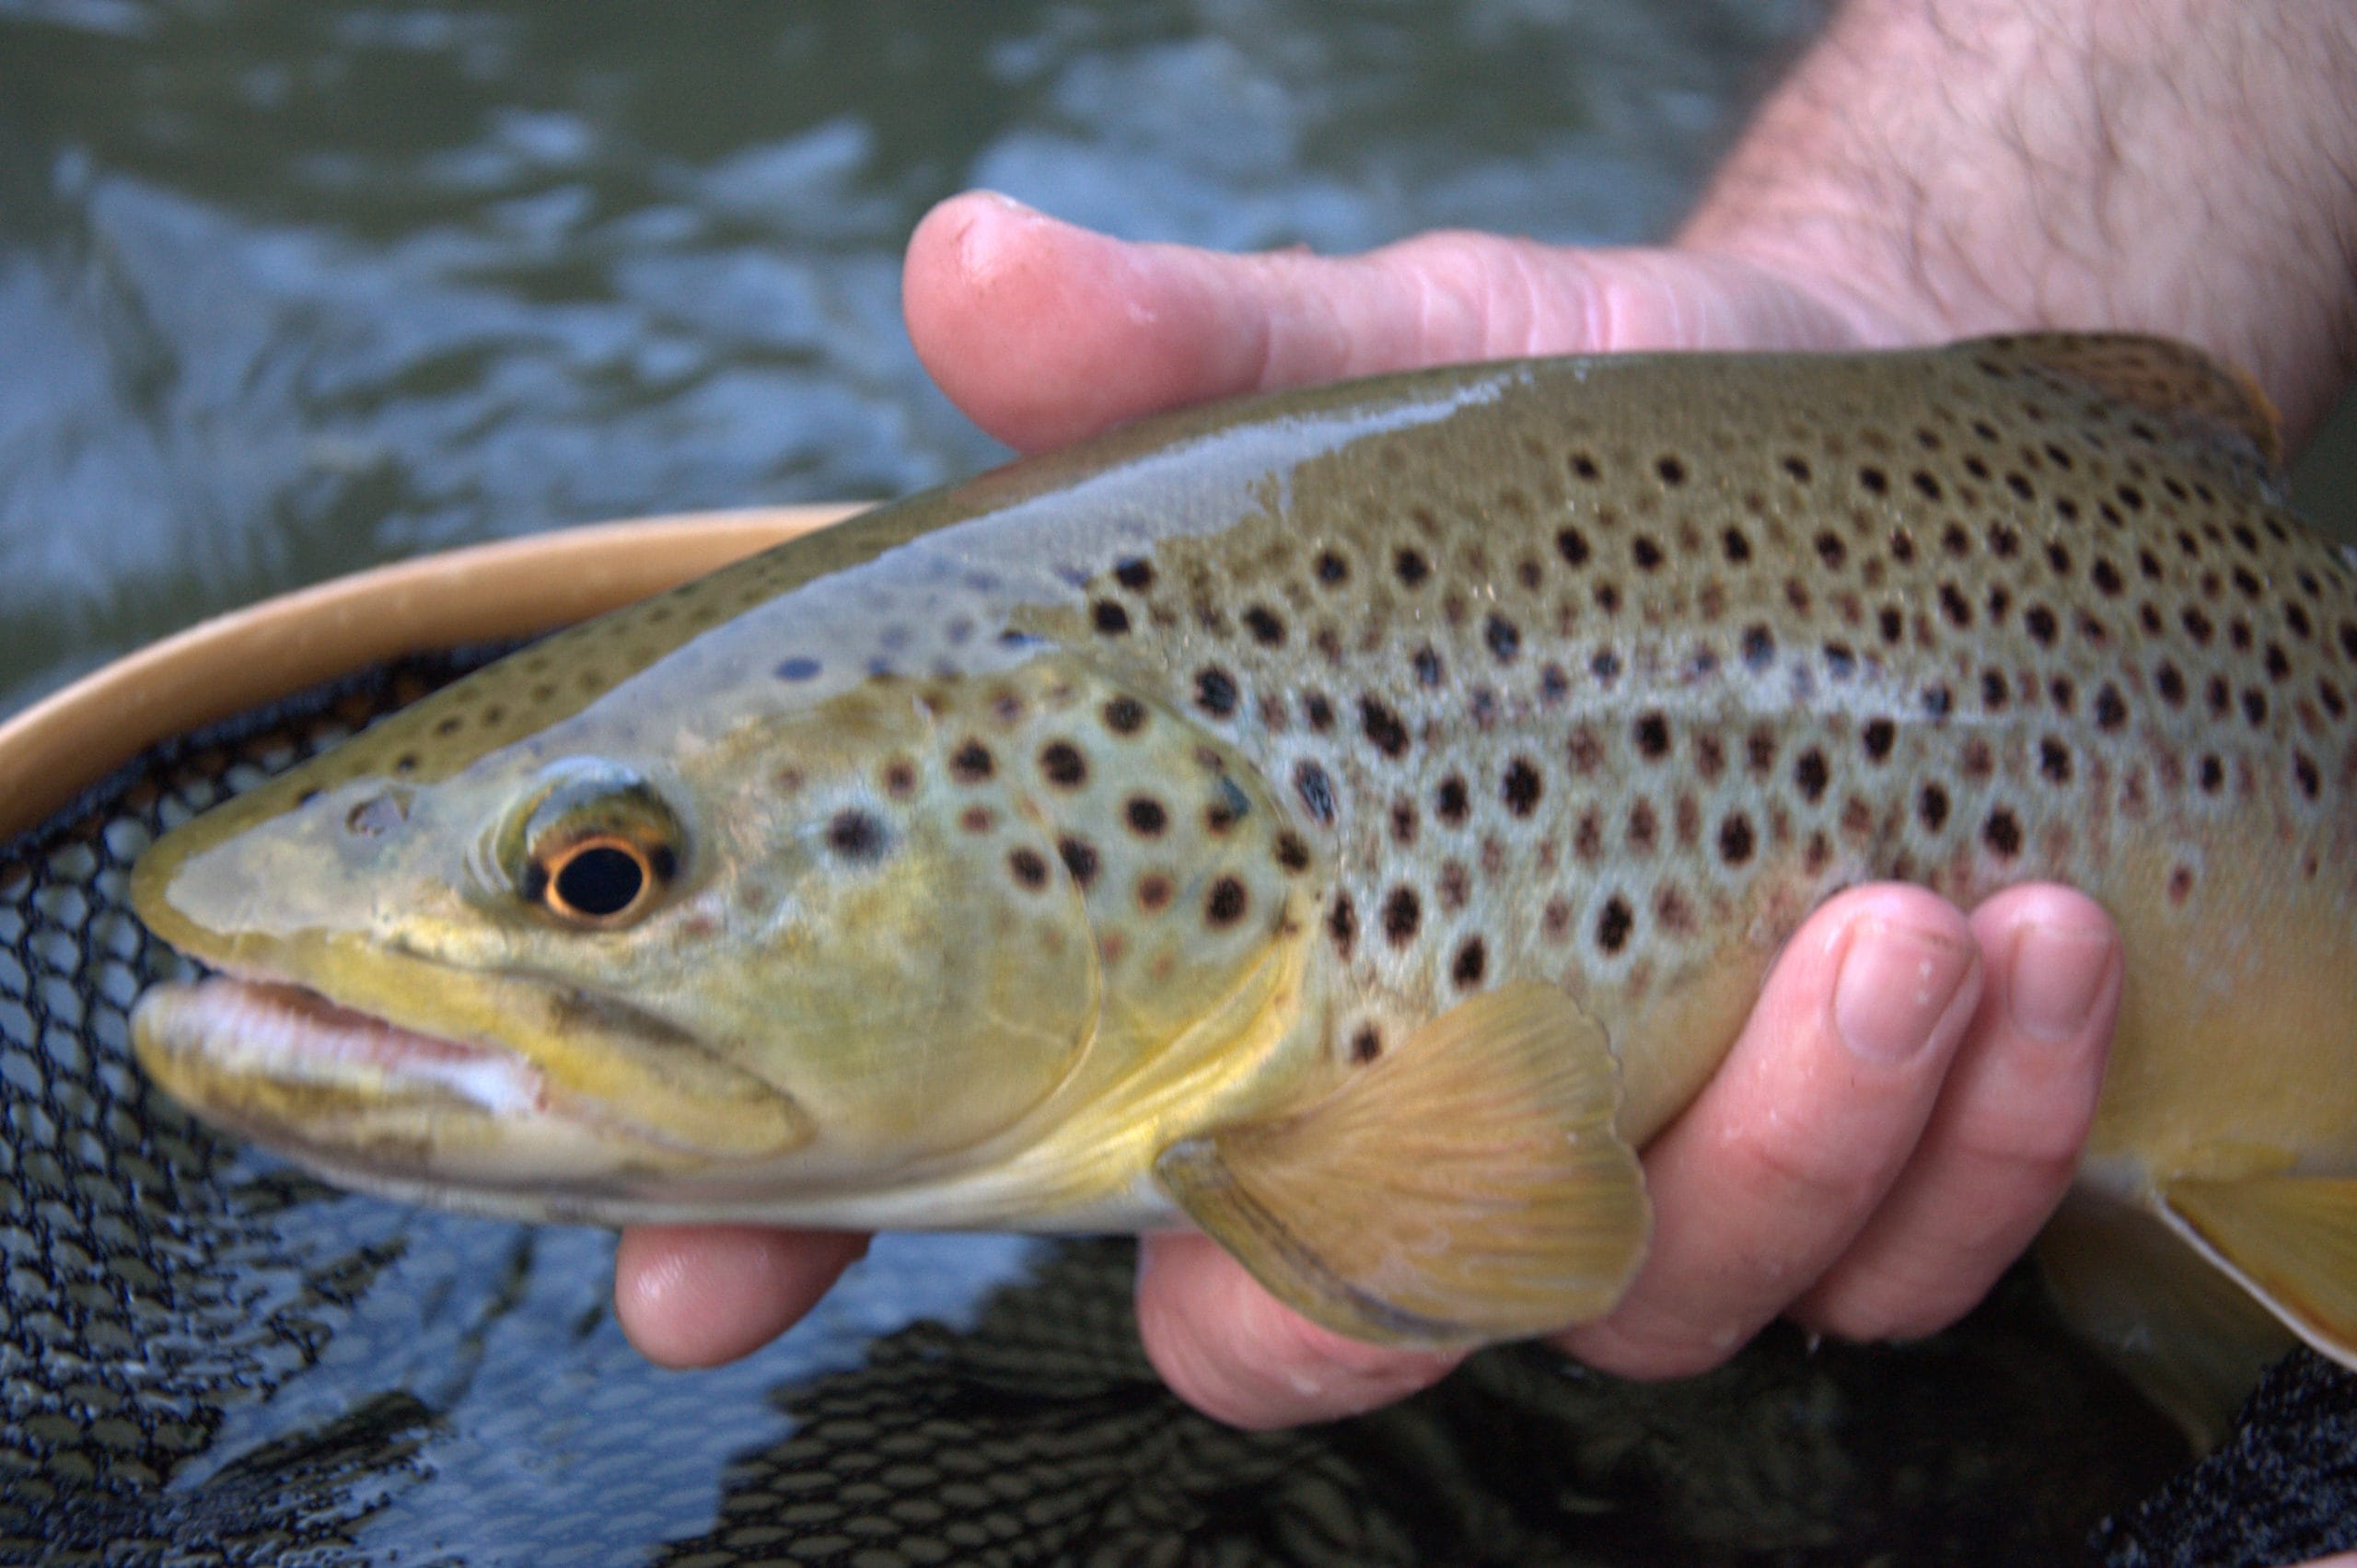 Brown trout and other species can be effectively caught using the tight line fishing technique.